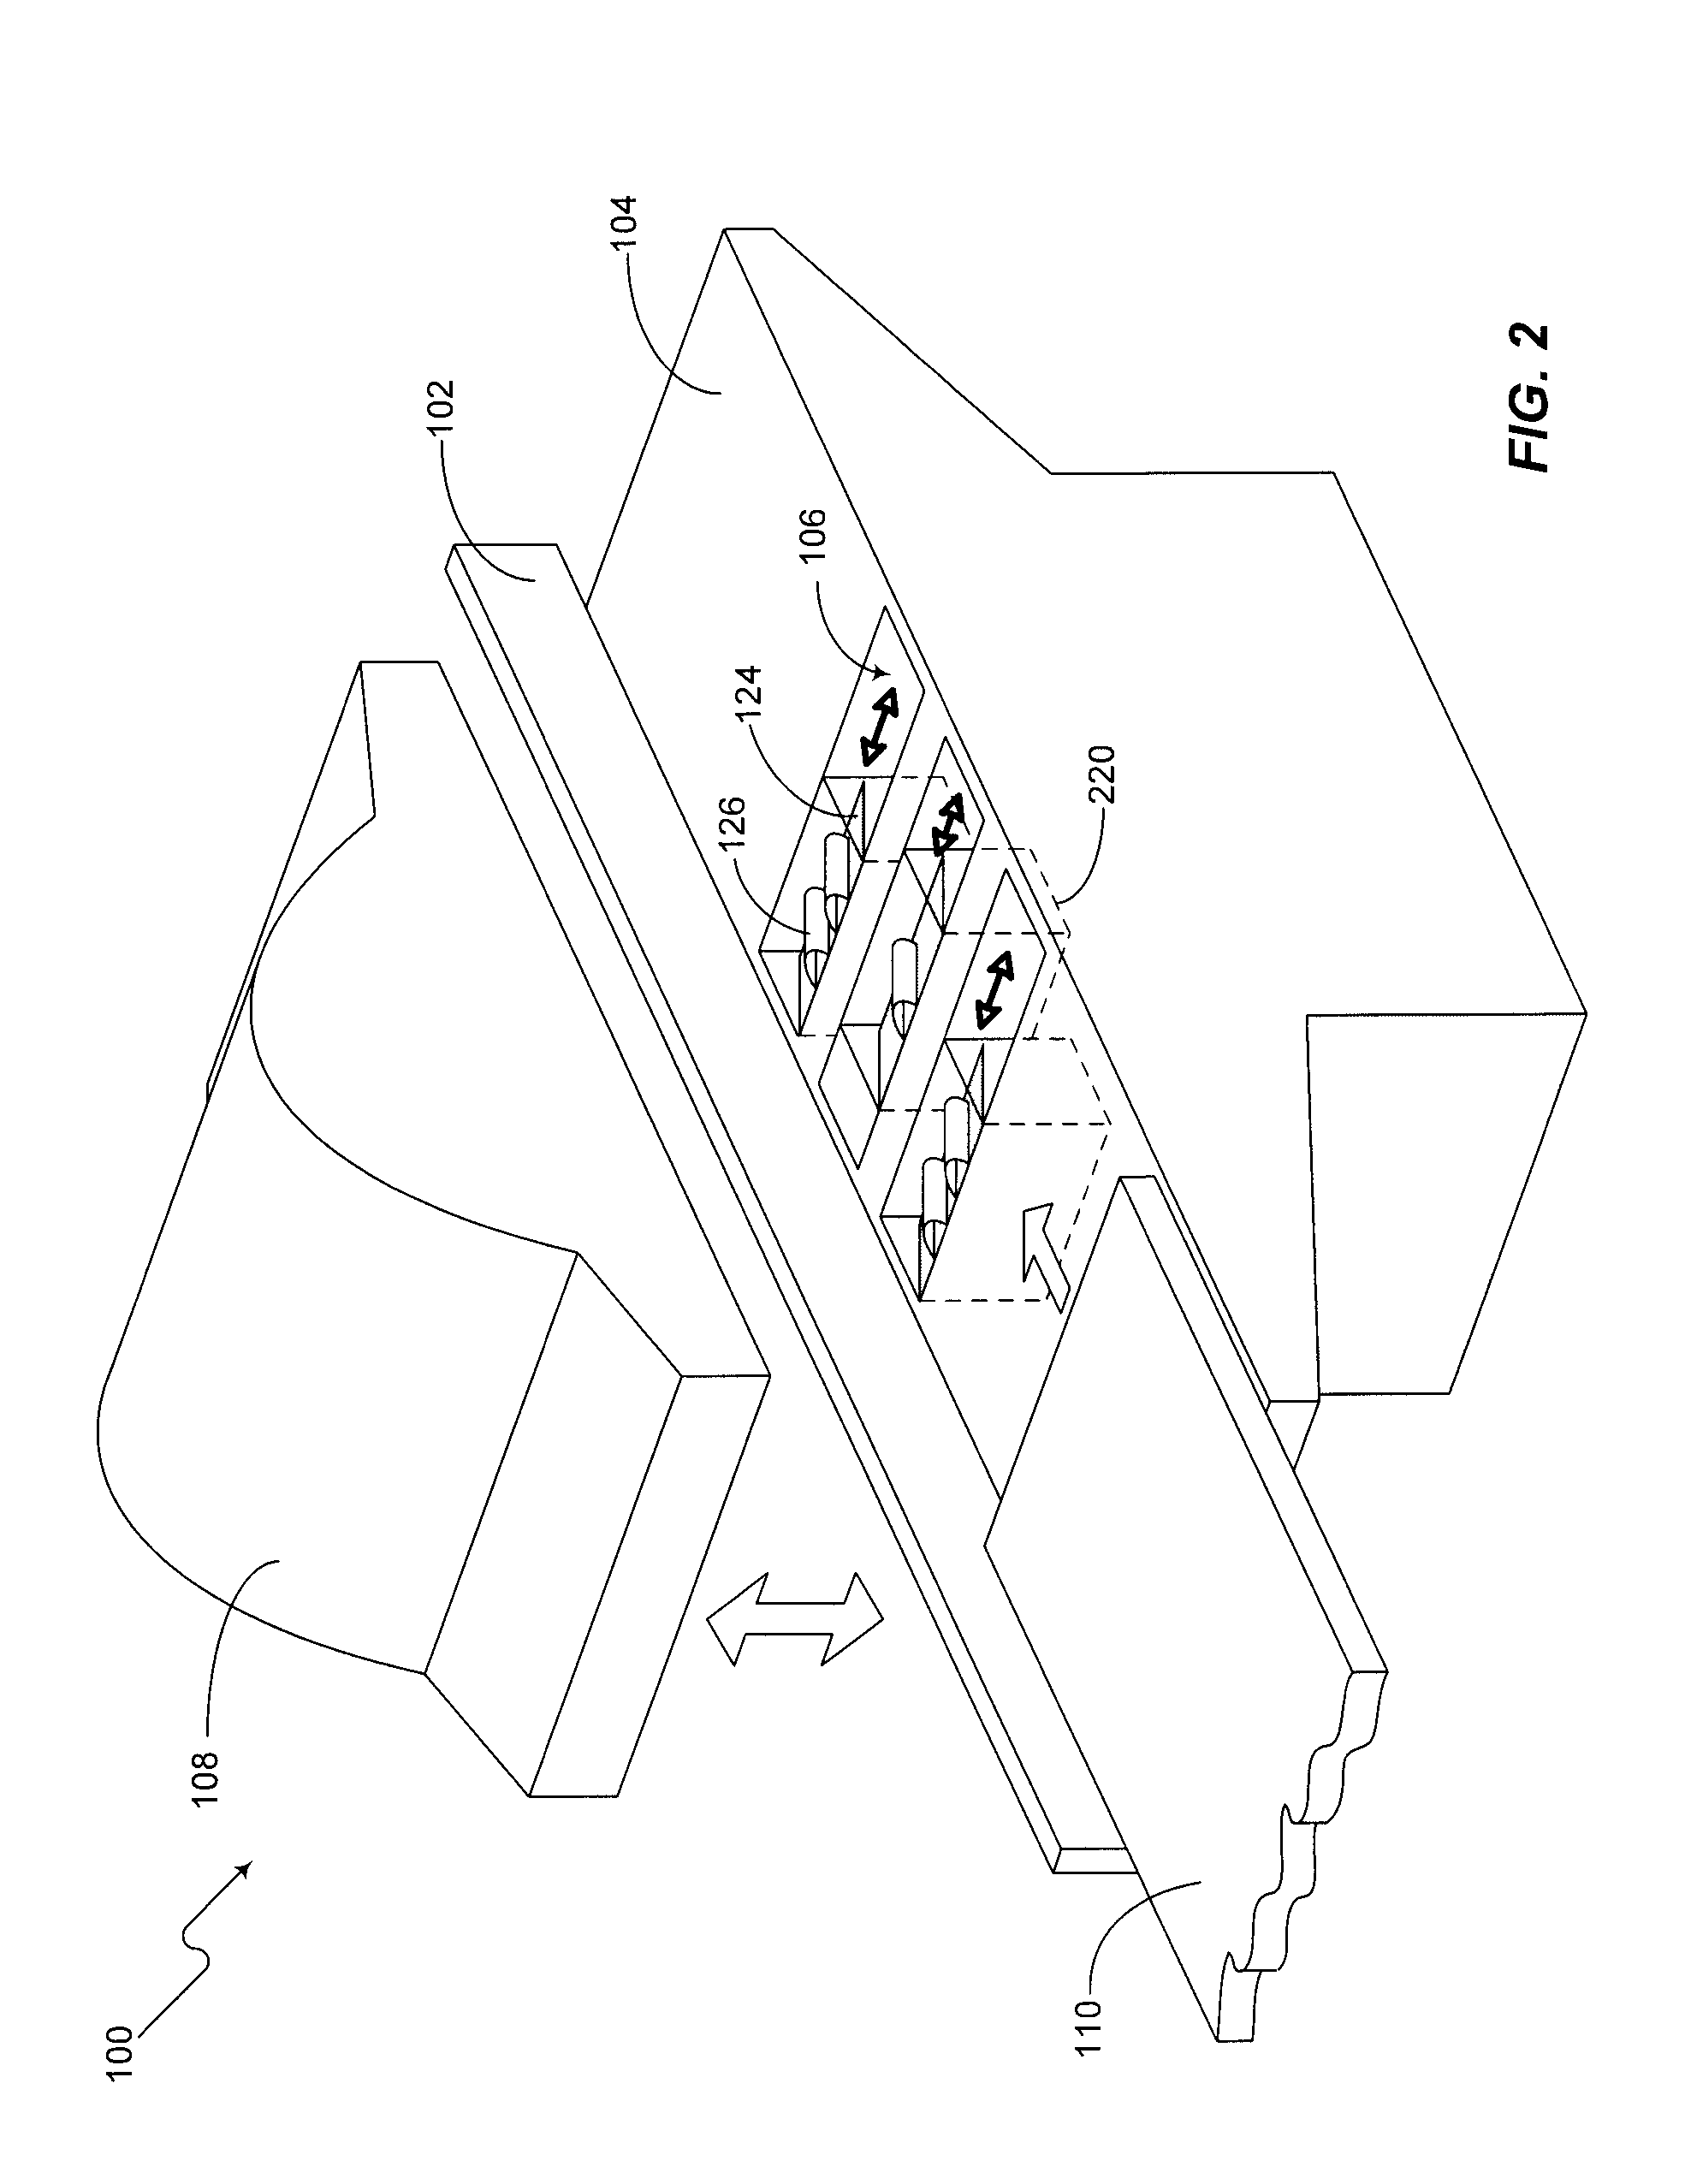 Hardwood texturing apparatus and methods for using same